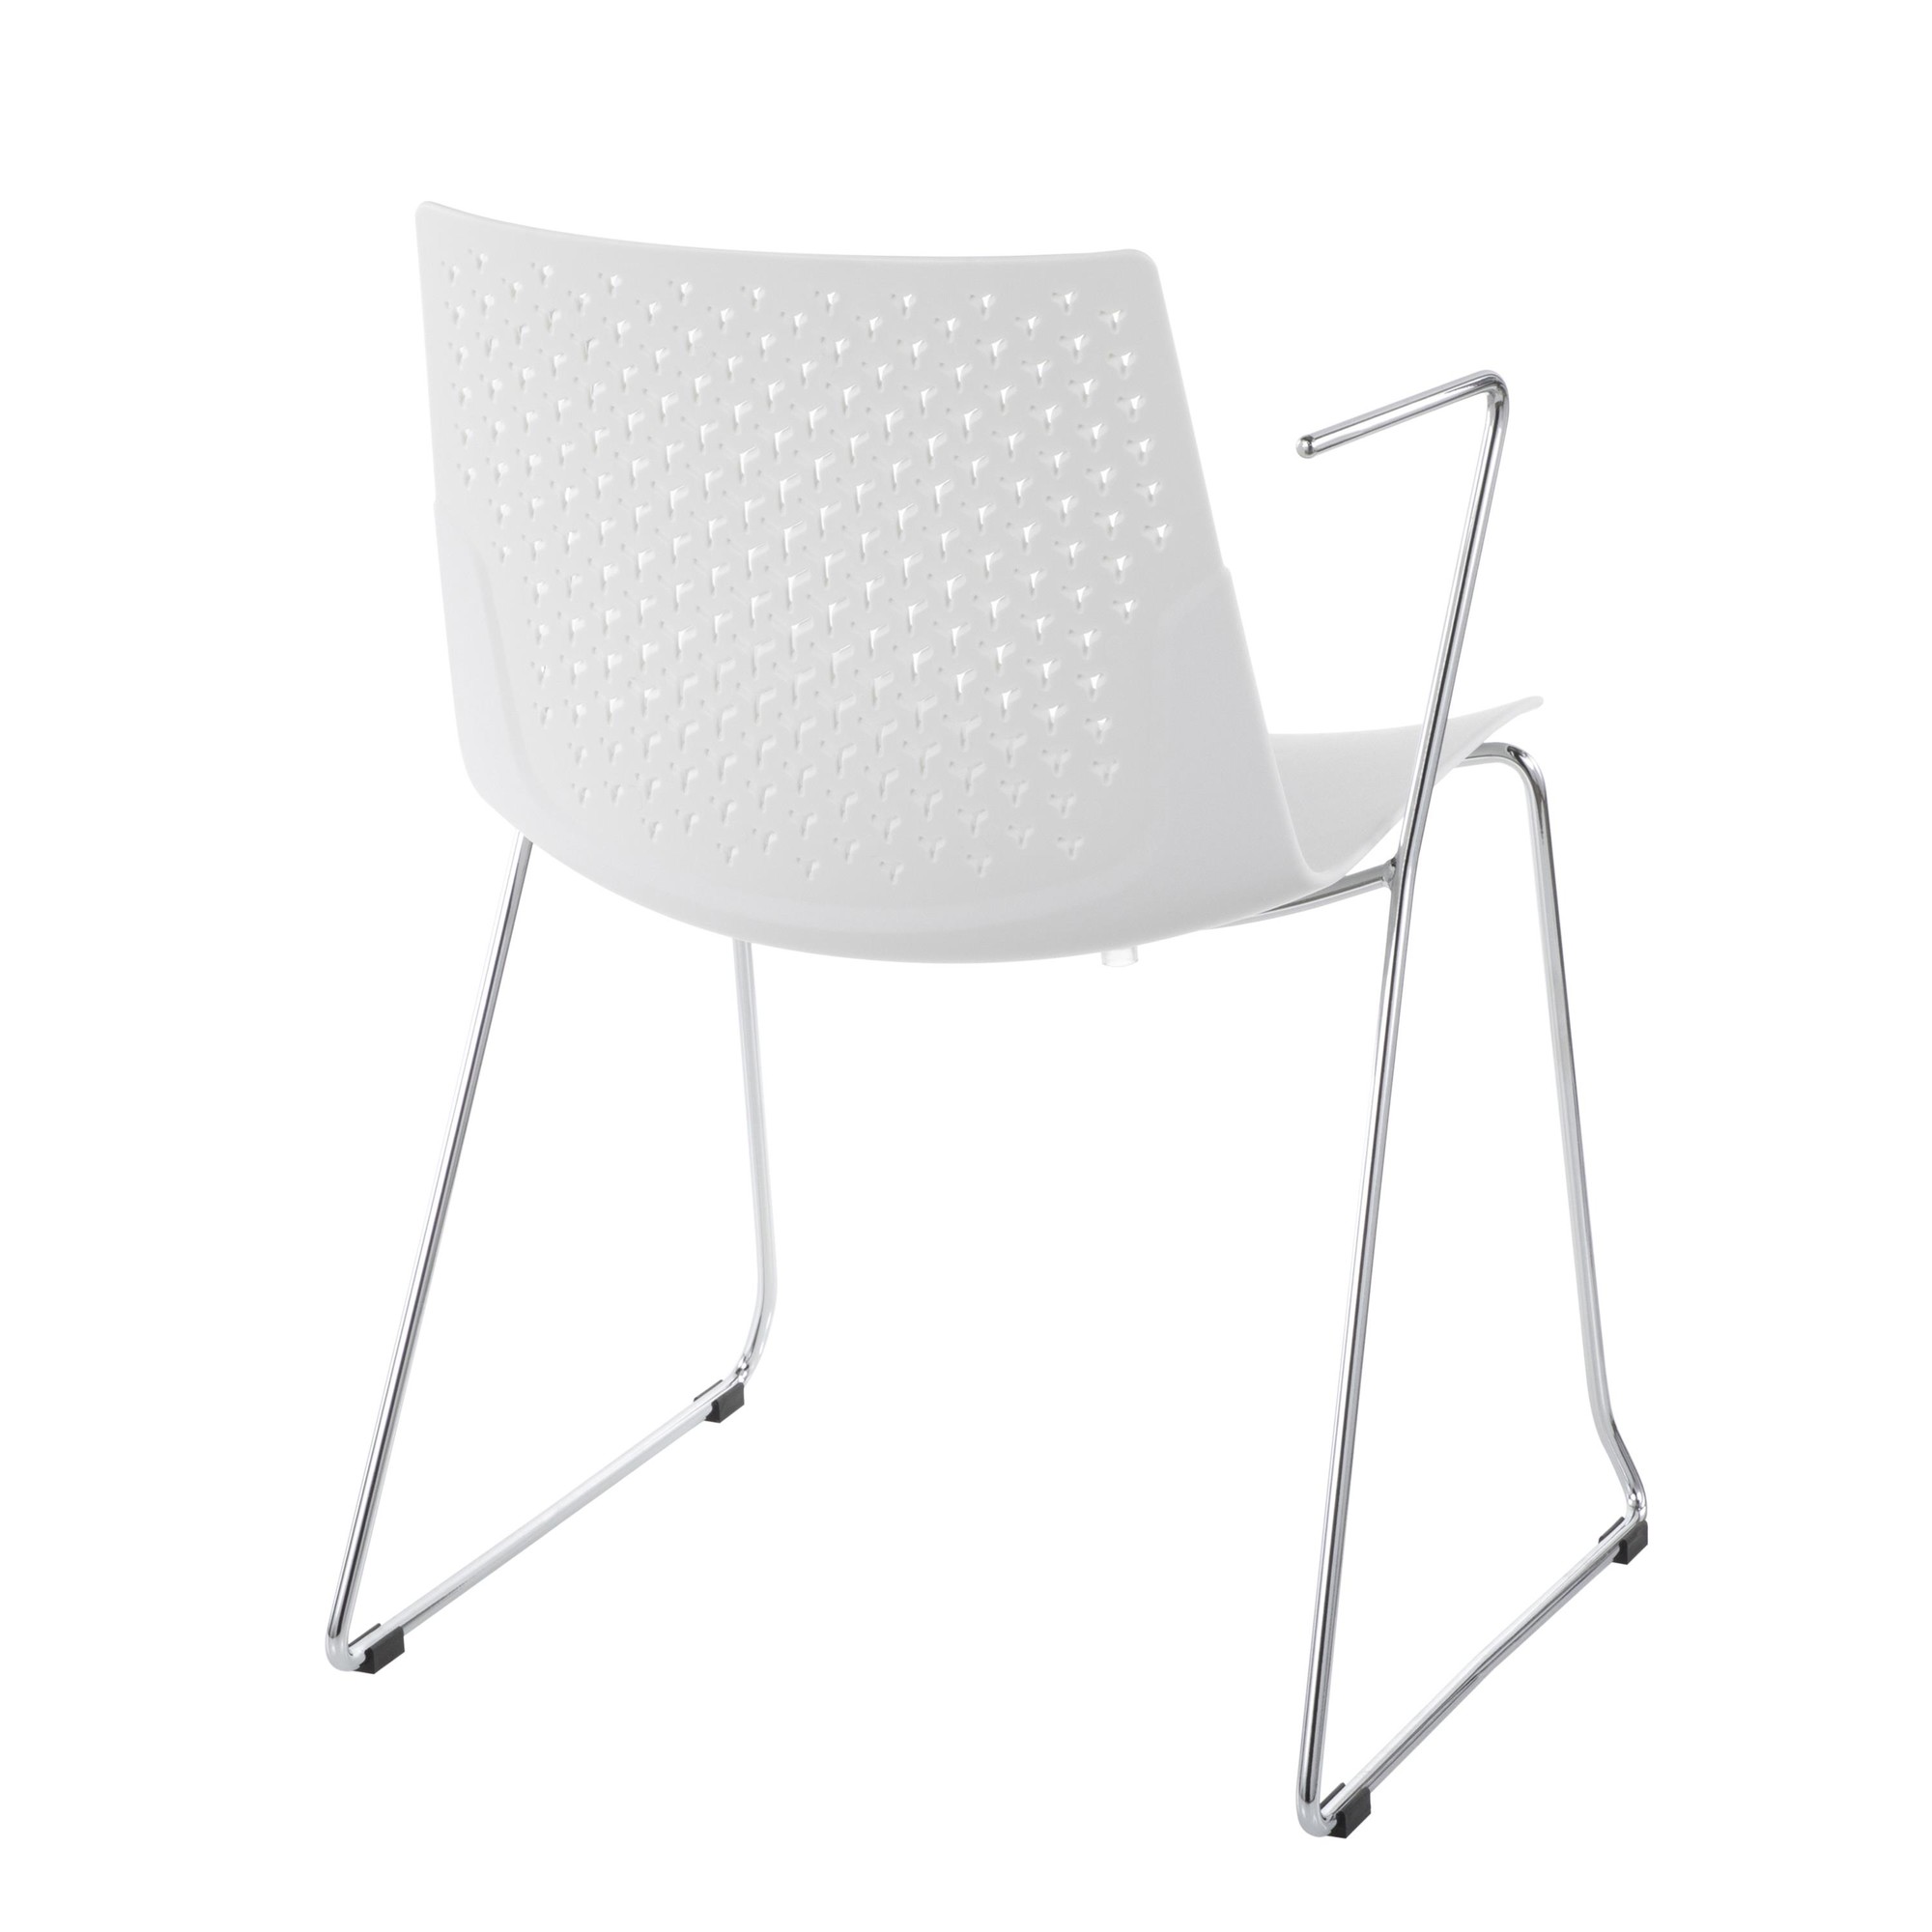 Contemporary Home Living Set of 2 White Contemporary Chair with Chrome Base 32”